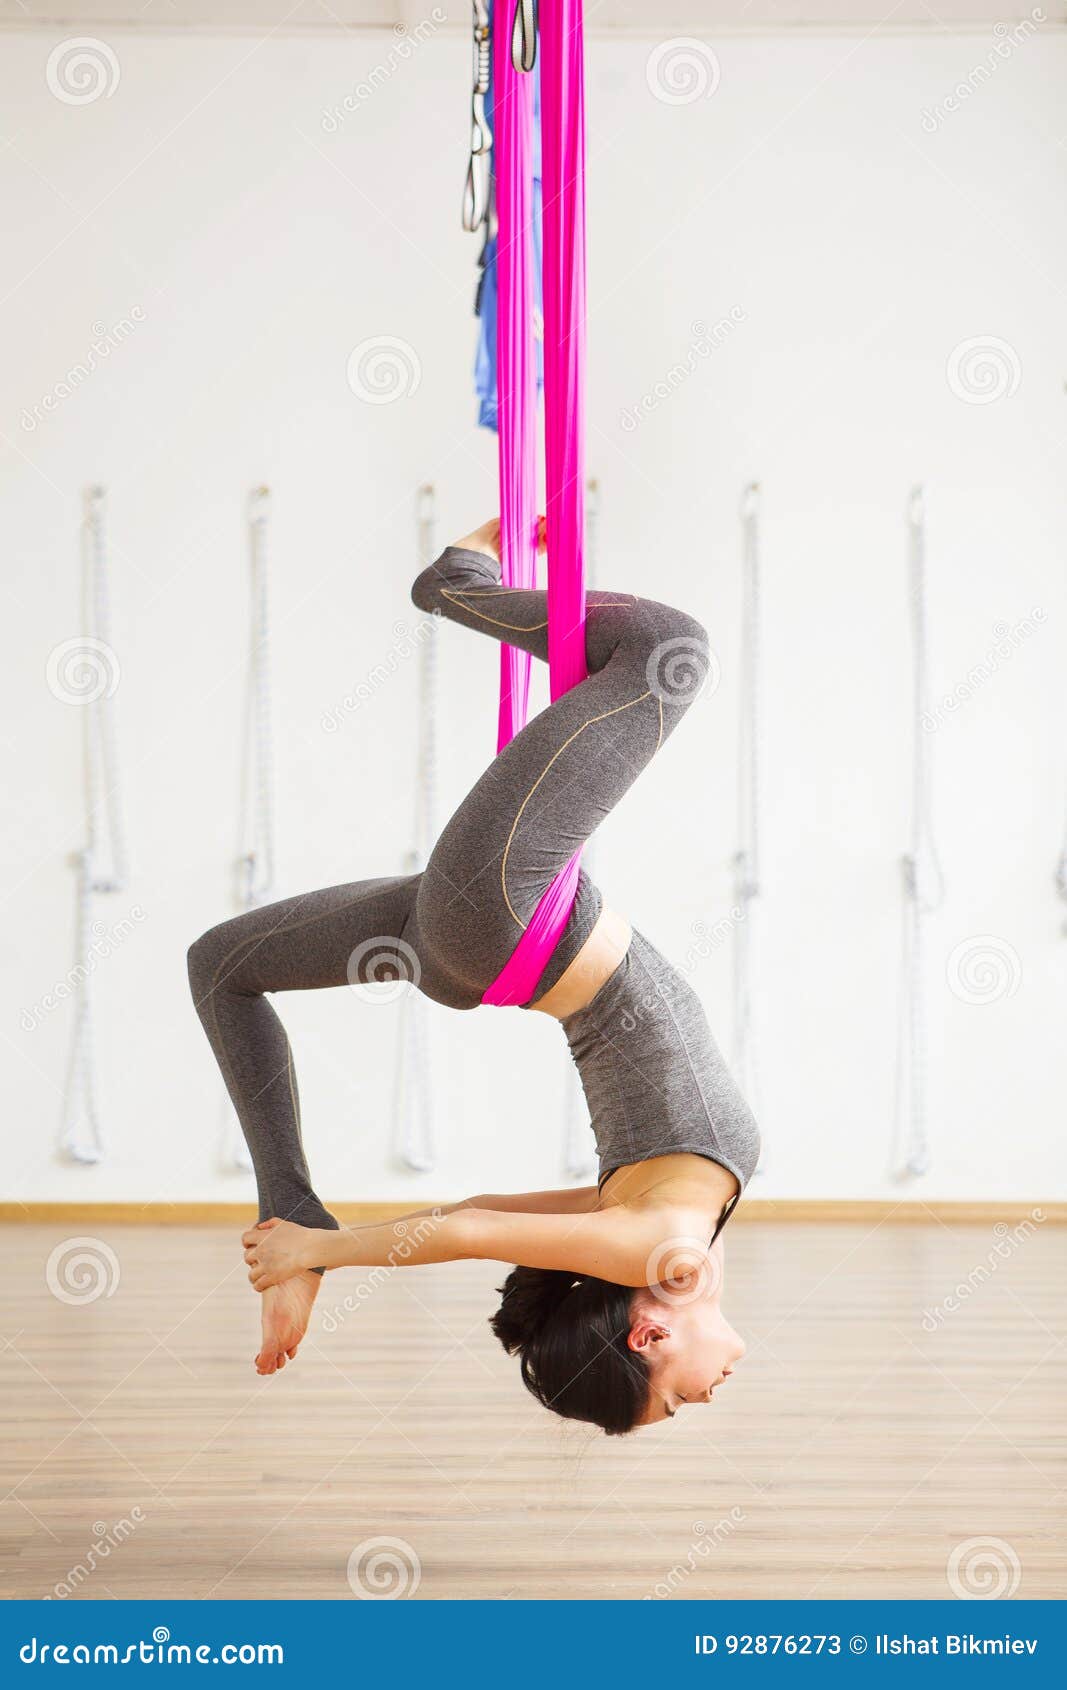 Aerial Yoga: How to Do It and Benefits You Can Gain